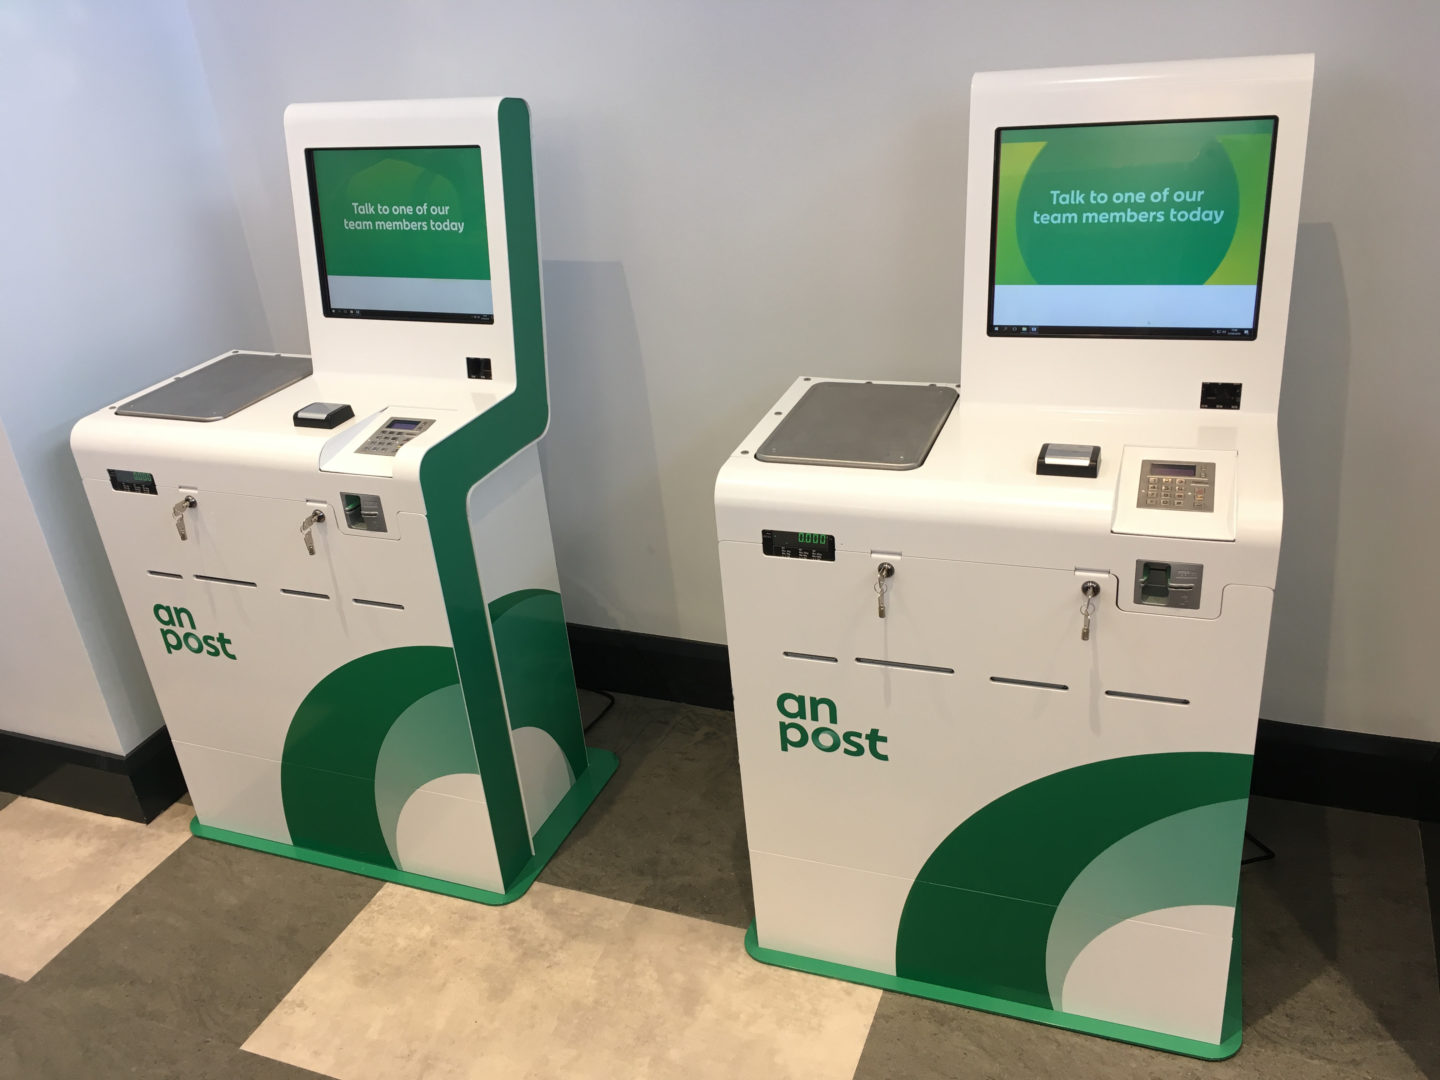 green and white smart postal kiosks with integrated scale allowing bill payments and stamp printing onto various size stamps designed for pick up and drop off (PUDO)